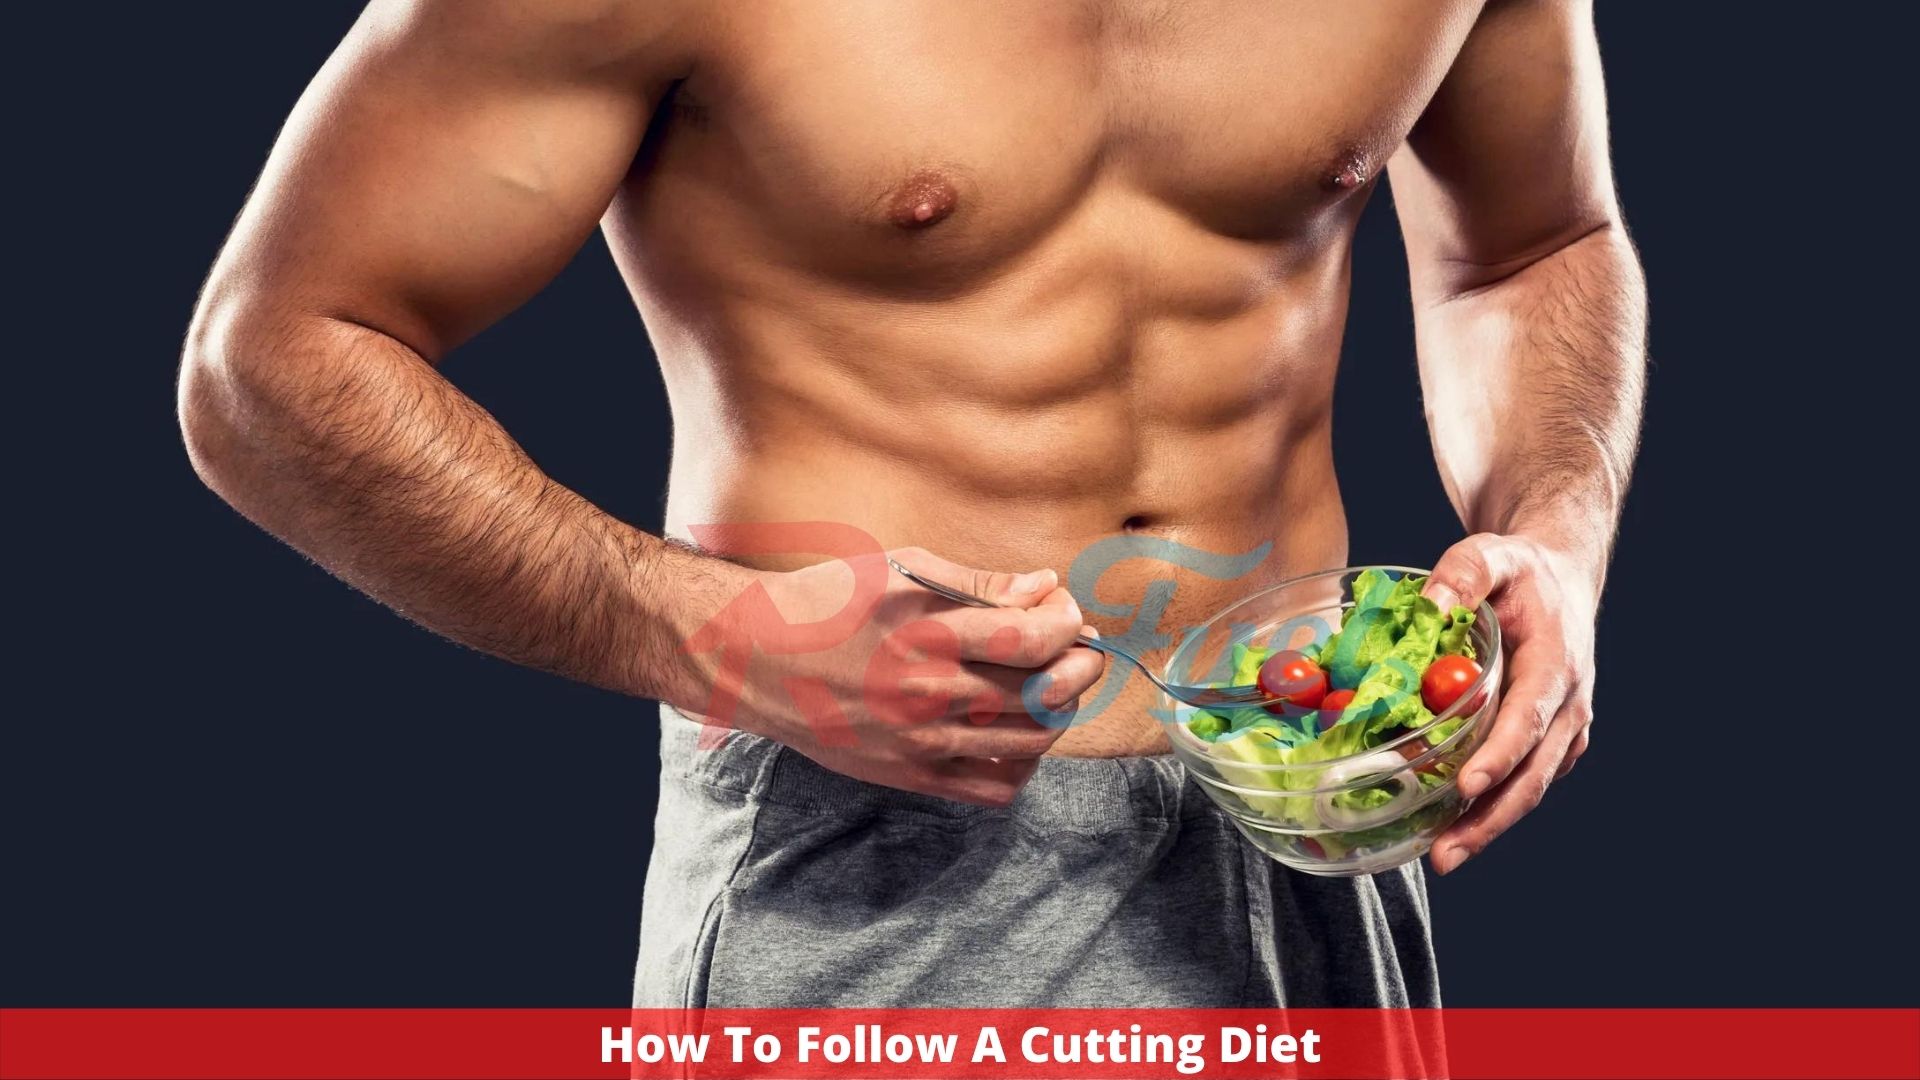 How To Follow A Cutting Diet: